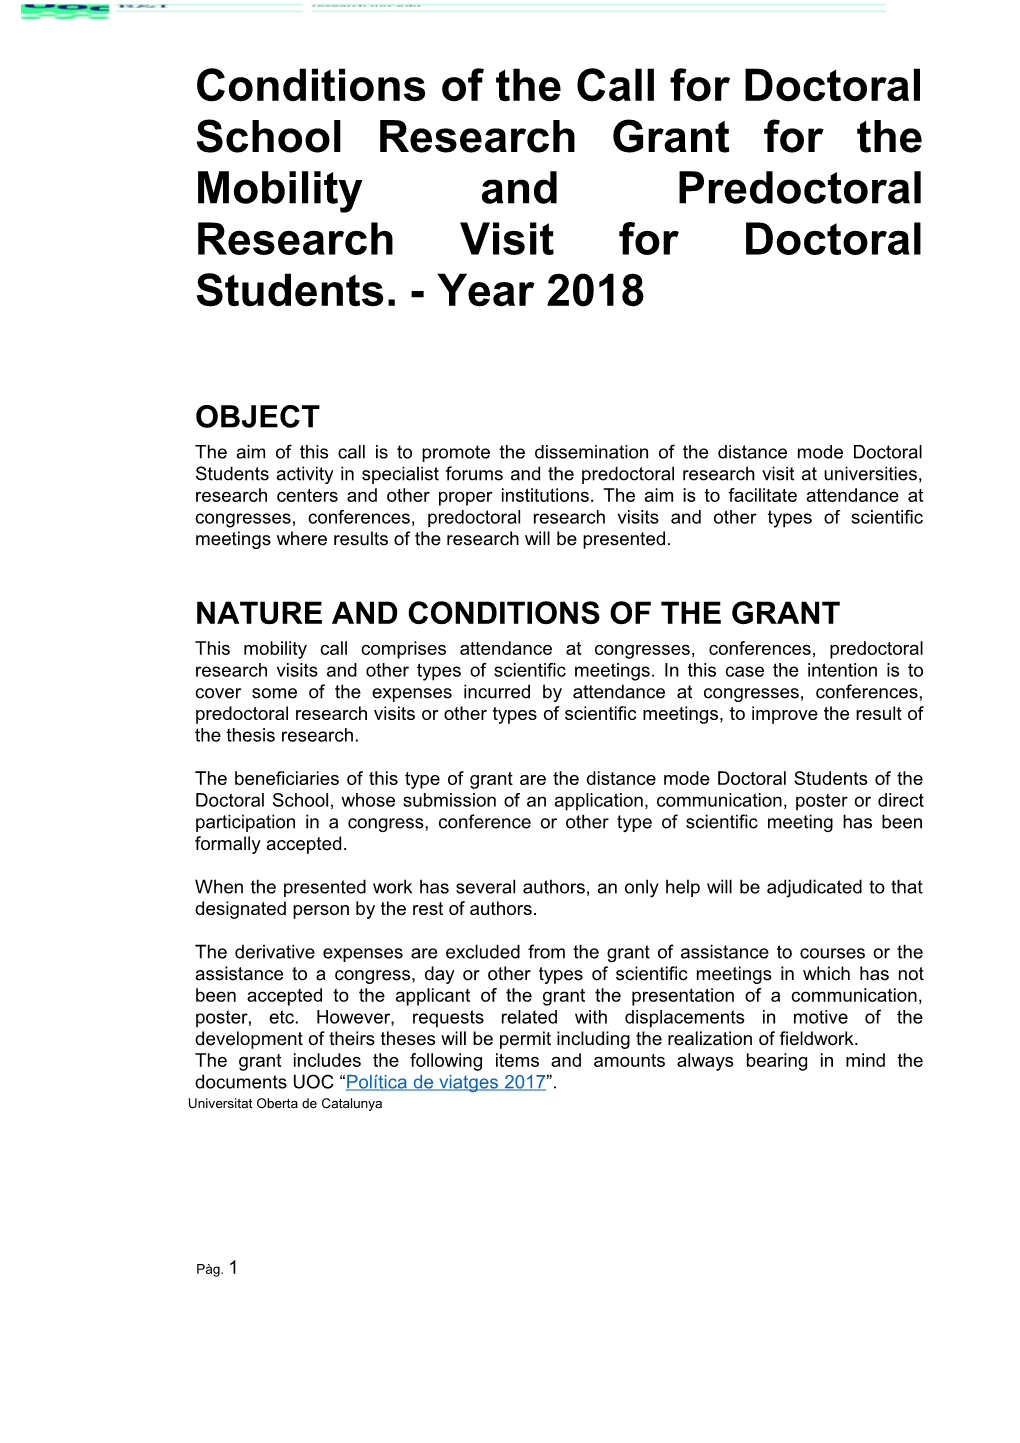 Nature and Conditions of the Grant